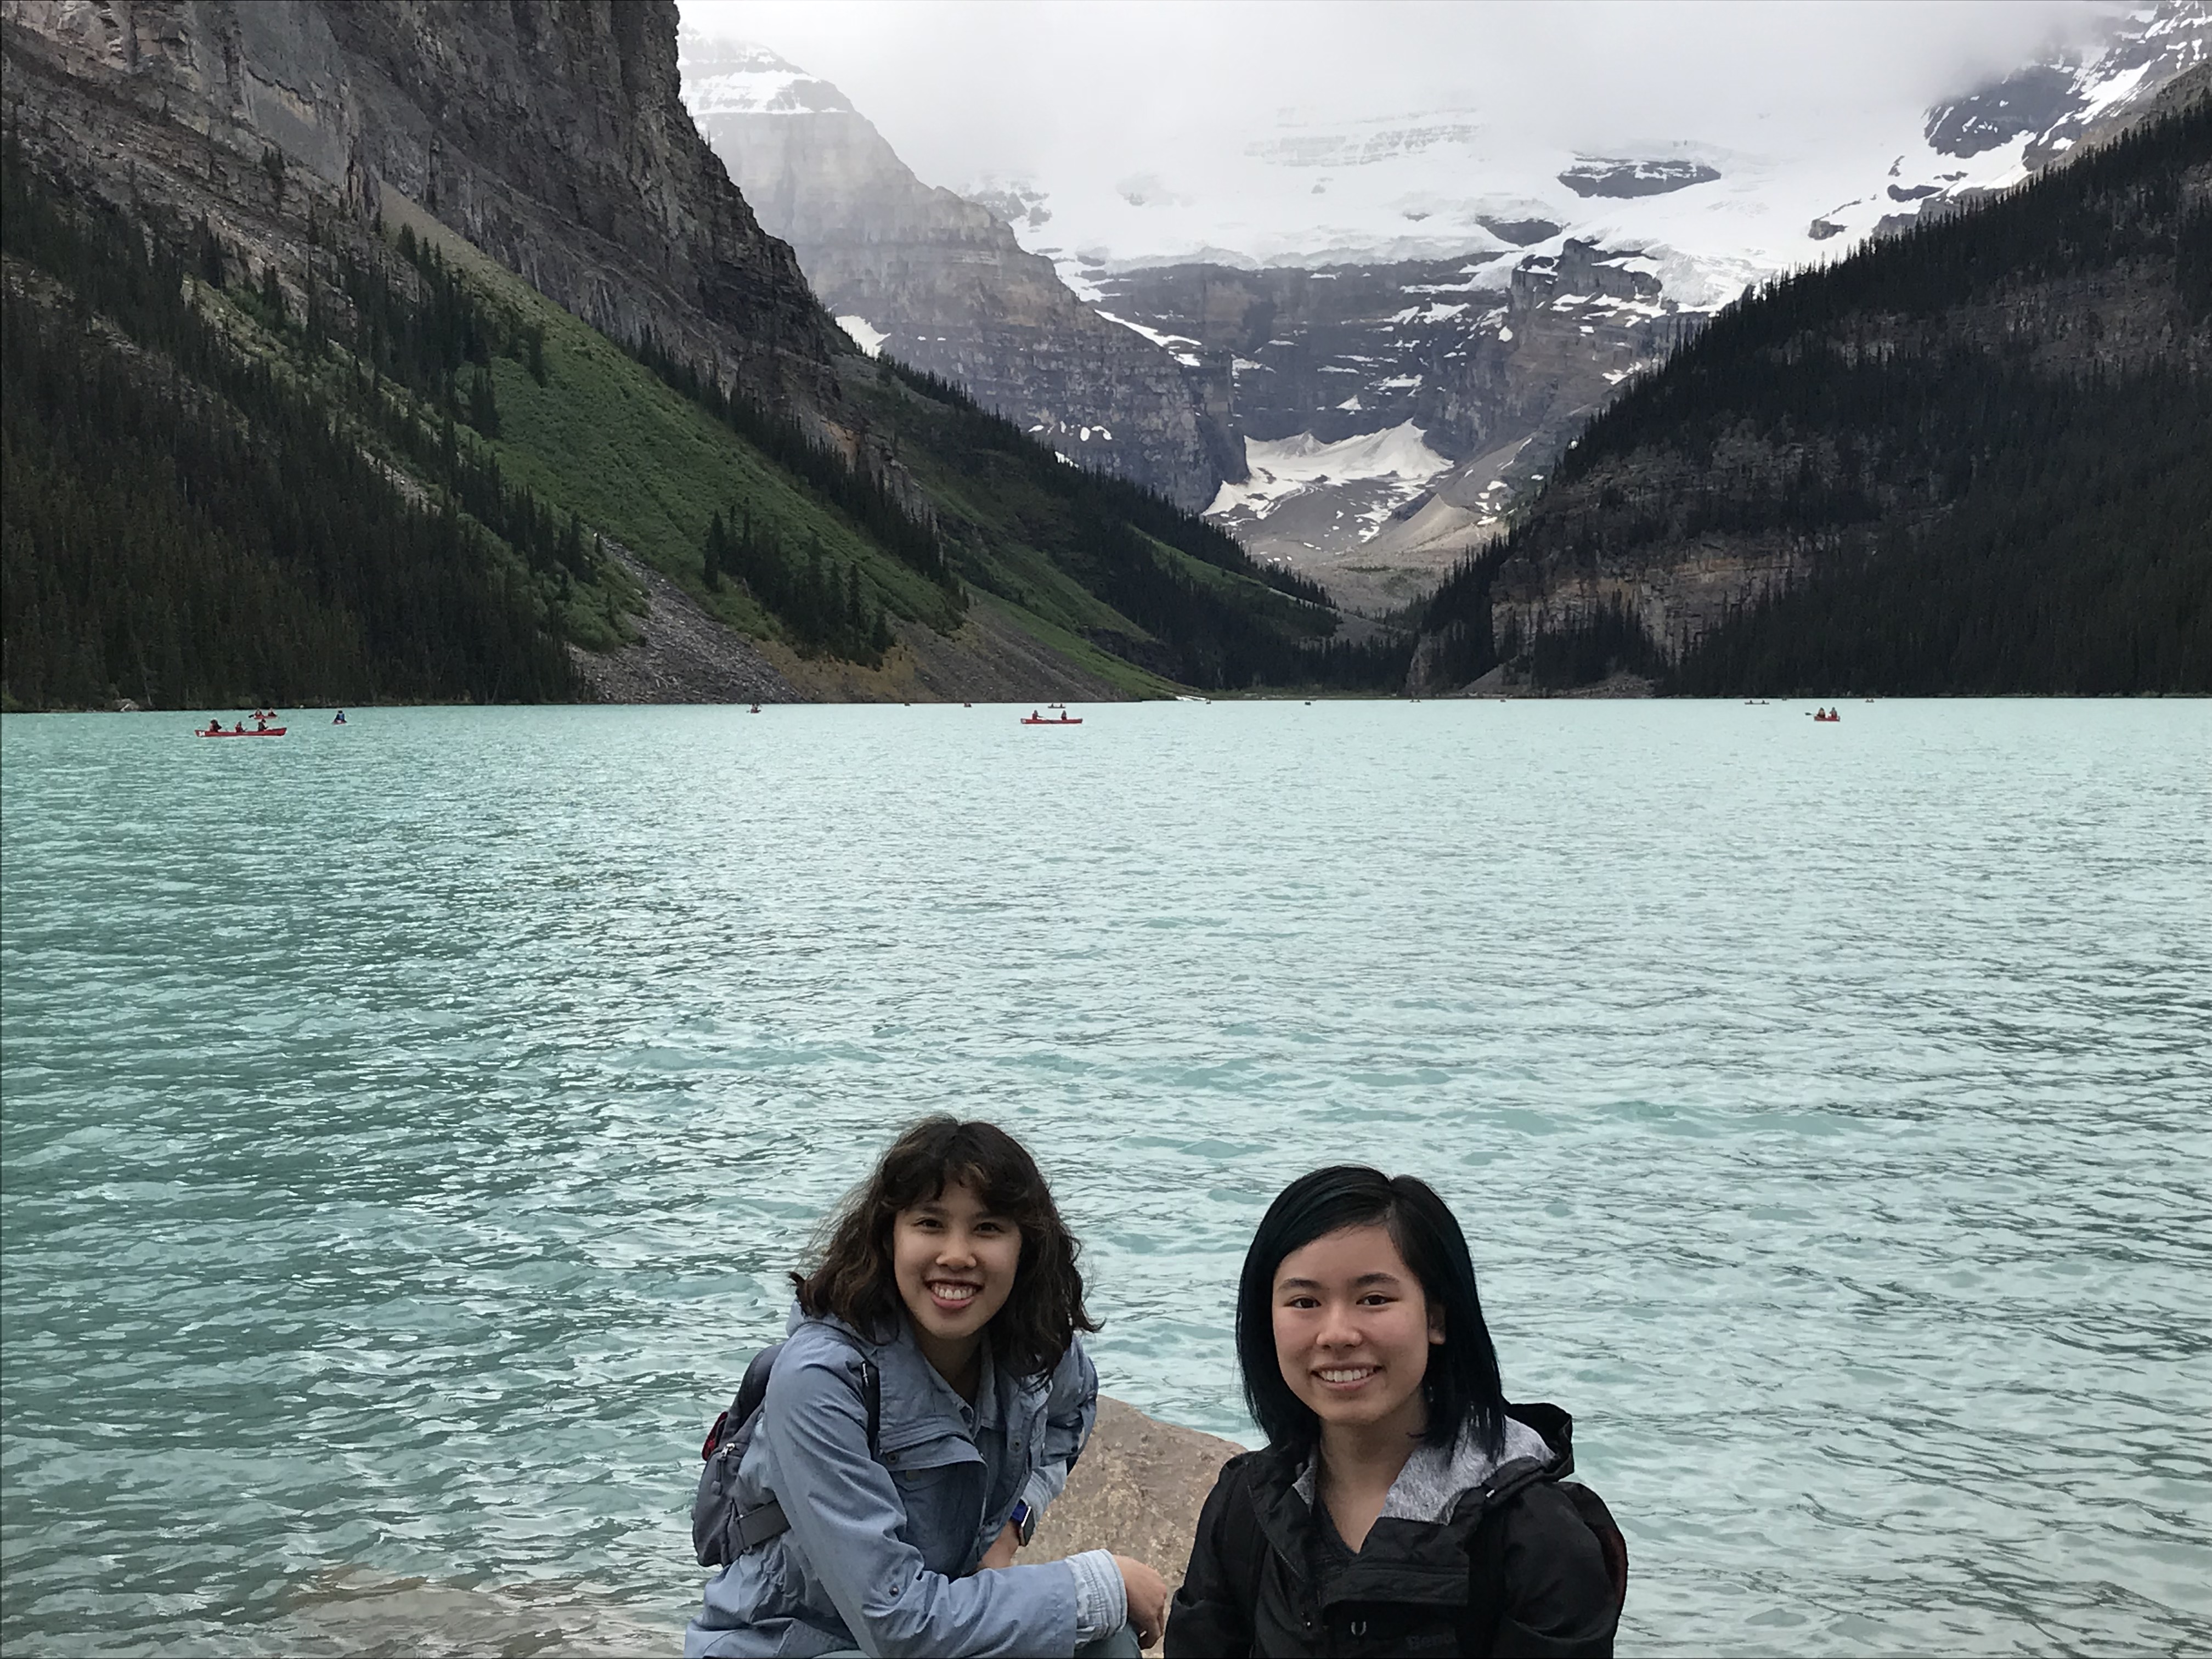 At Lake Louise in Banff National Park, Alberta, Canada. The turquoise lake has people rowing in canoes. Behind the lake is a tall, dark gray mountain range covered with snow, and a dark green pine forest covers the lower parts. Meggie, in her blue jacket, and Val, in her black jacket, are smiling in front of the whole scene.